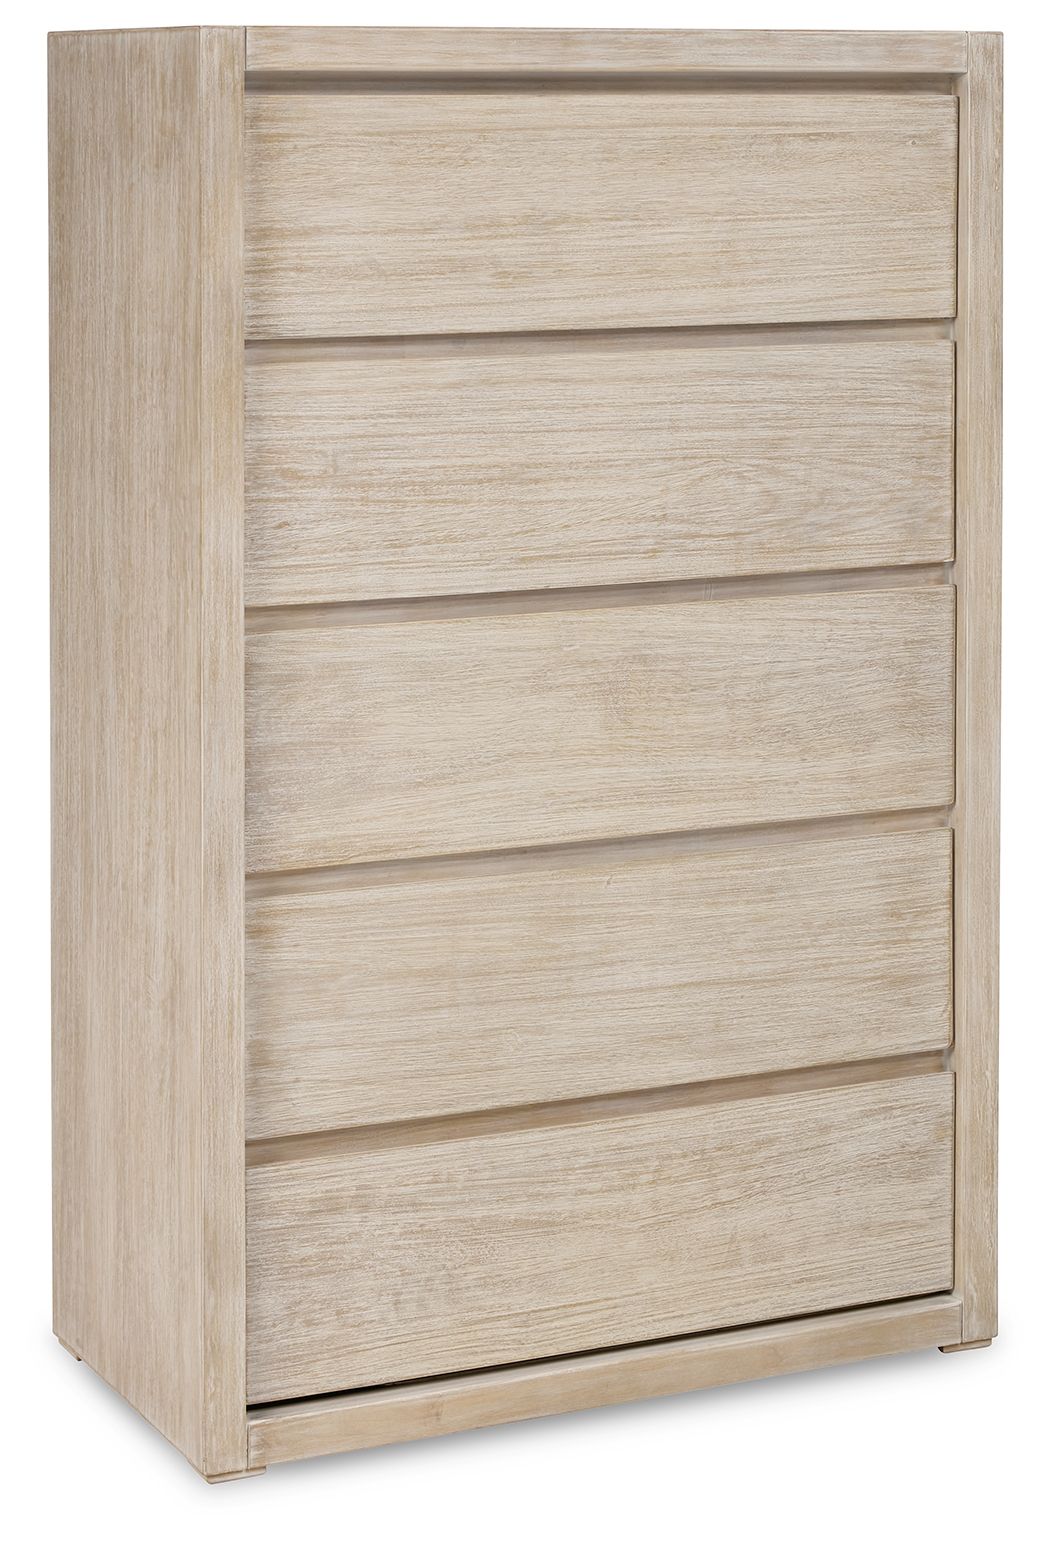 Michelia - Bisque - Five Drawer Chest - Tony's Home Furnishings